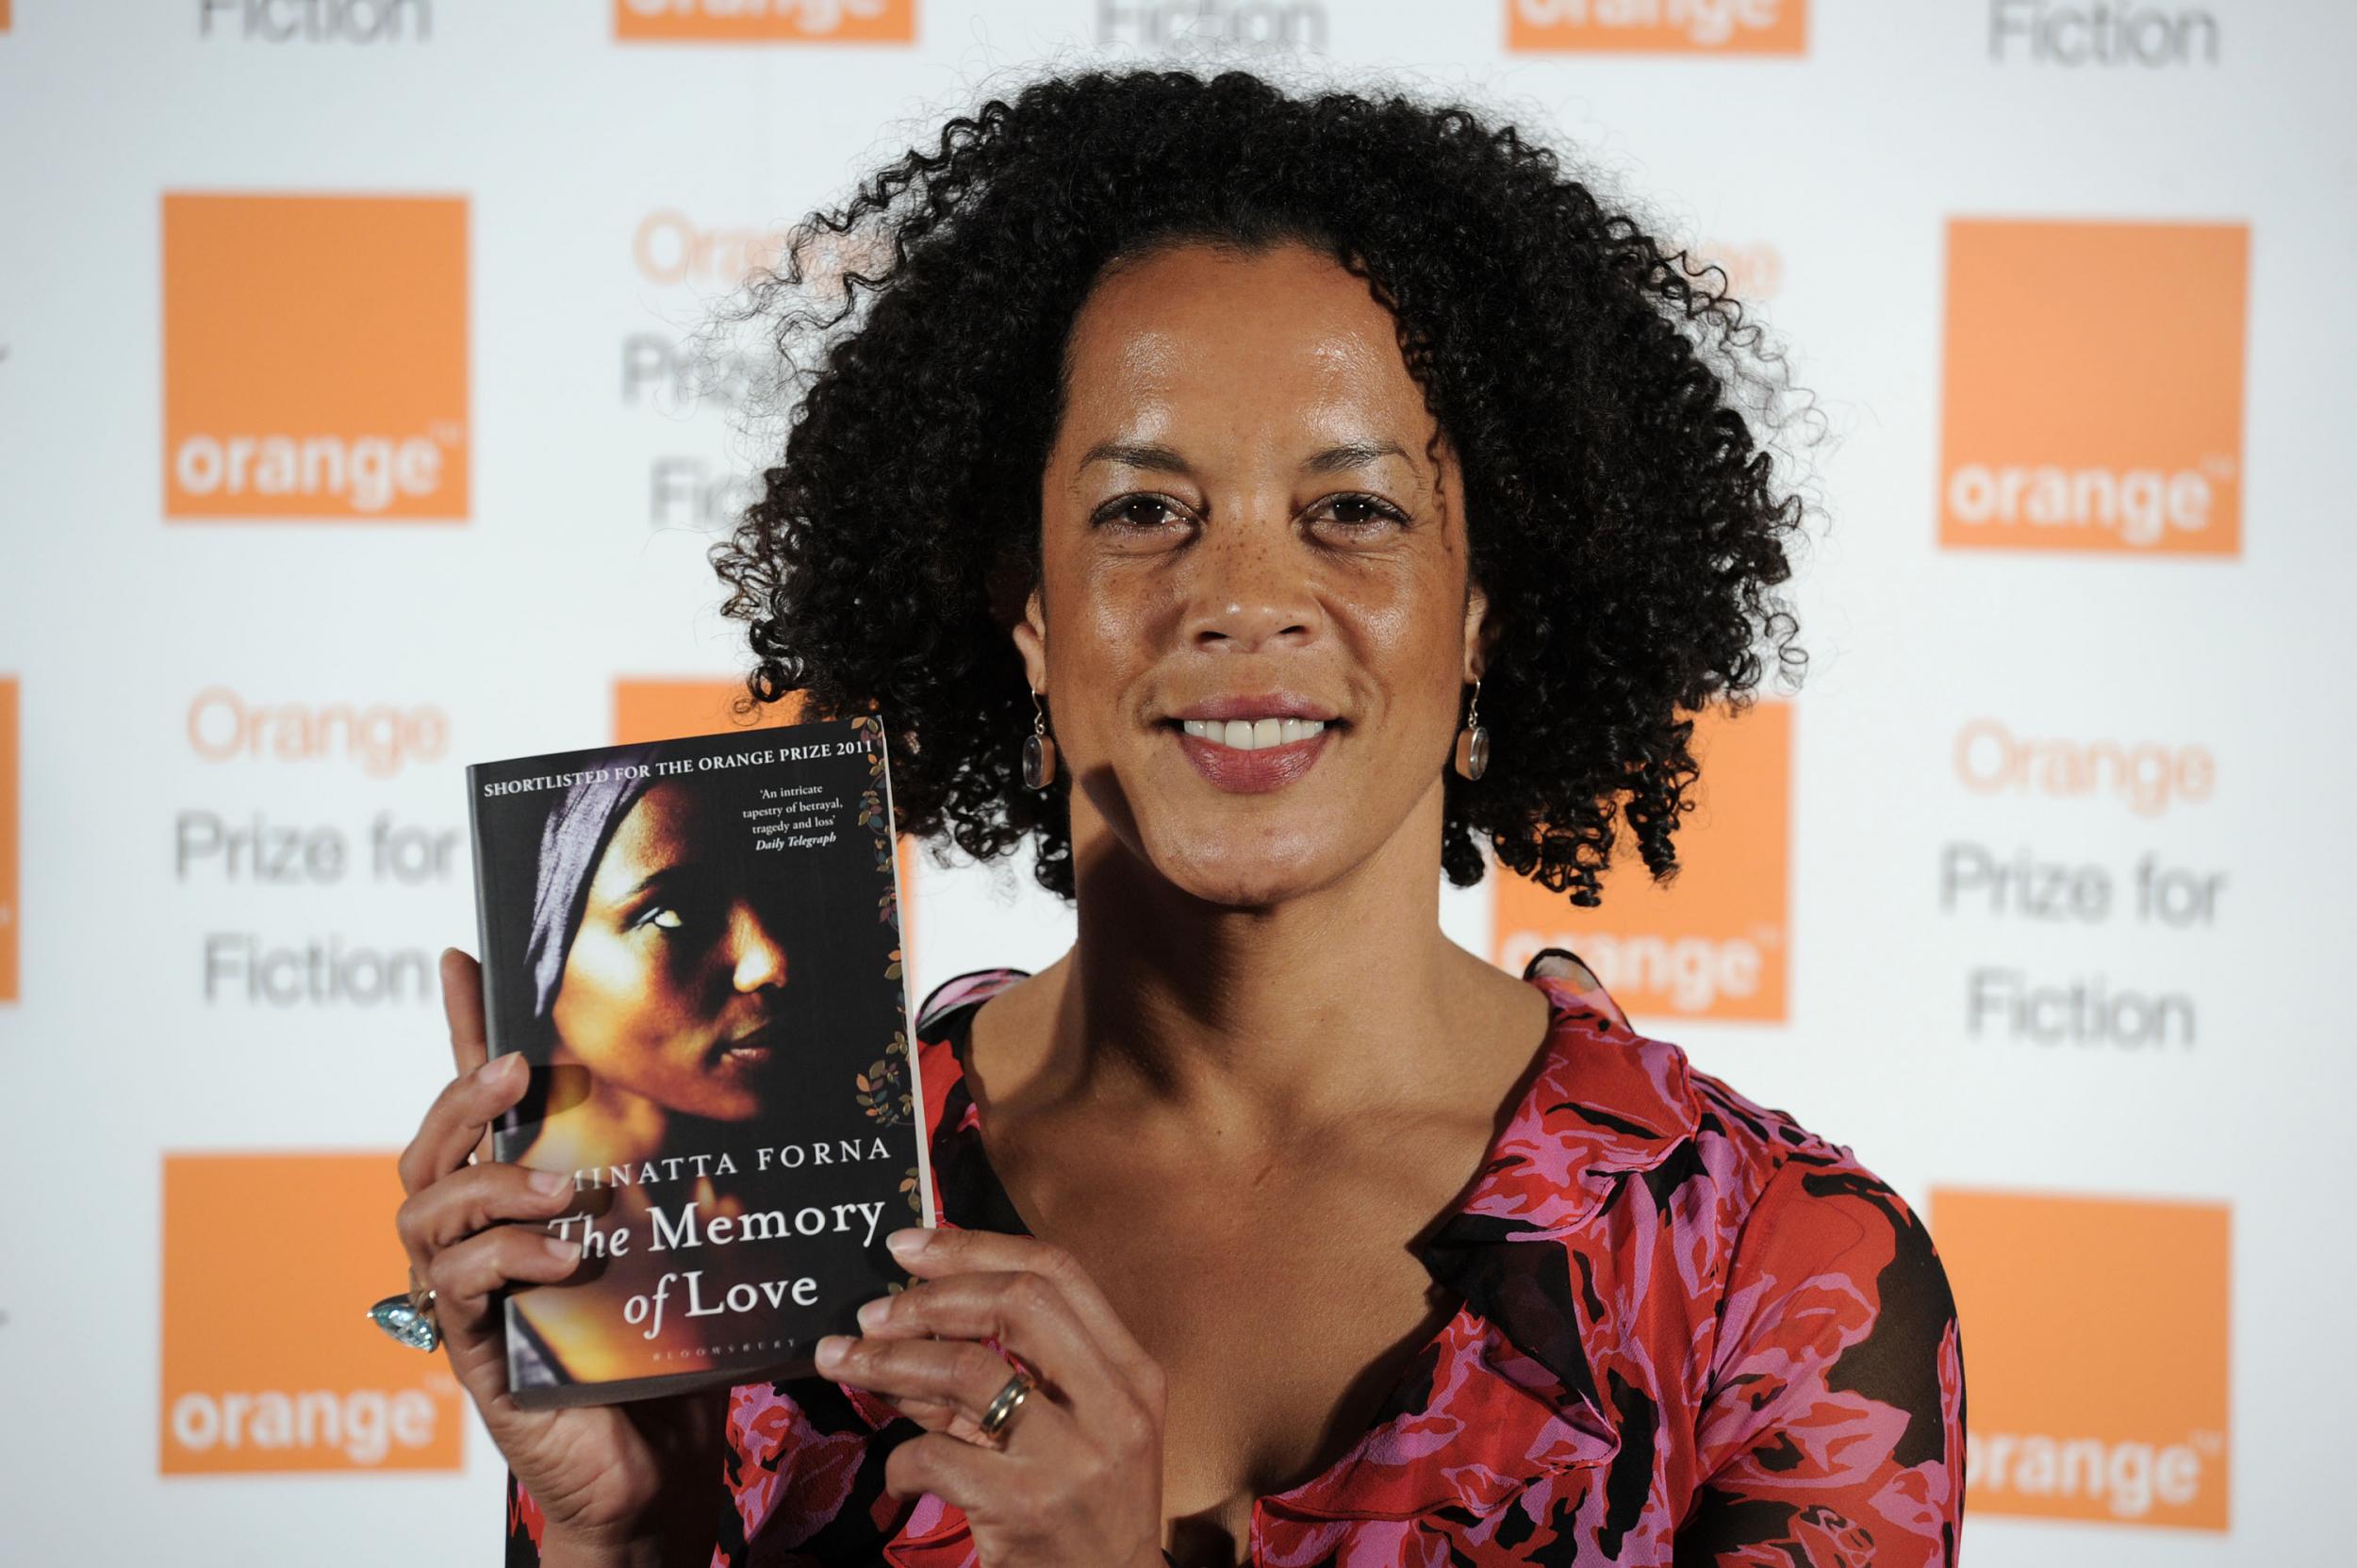 Aminatta Forna’s ‘The Memory of Love’ was shortlisted for the 2011 Orange Prize for Fiction